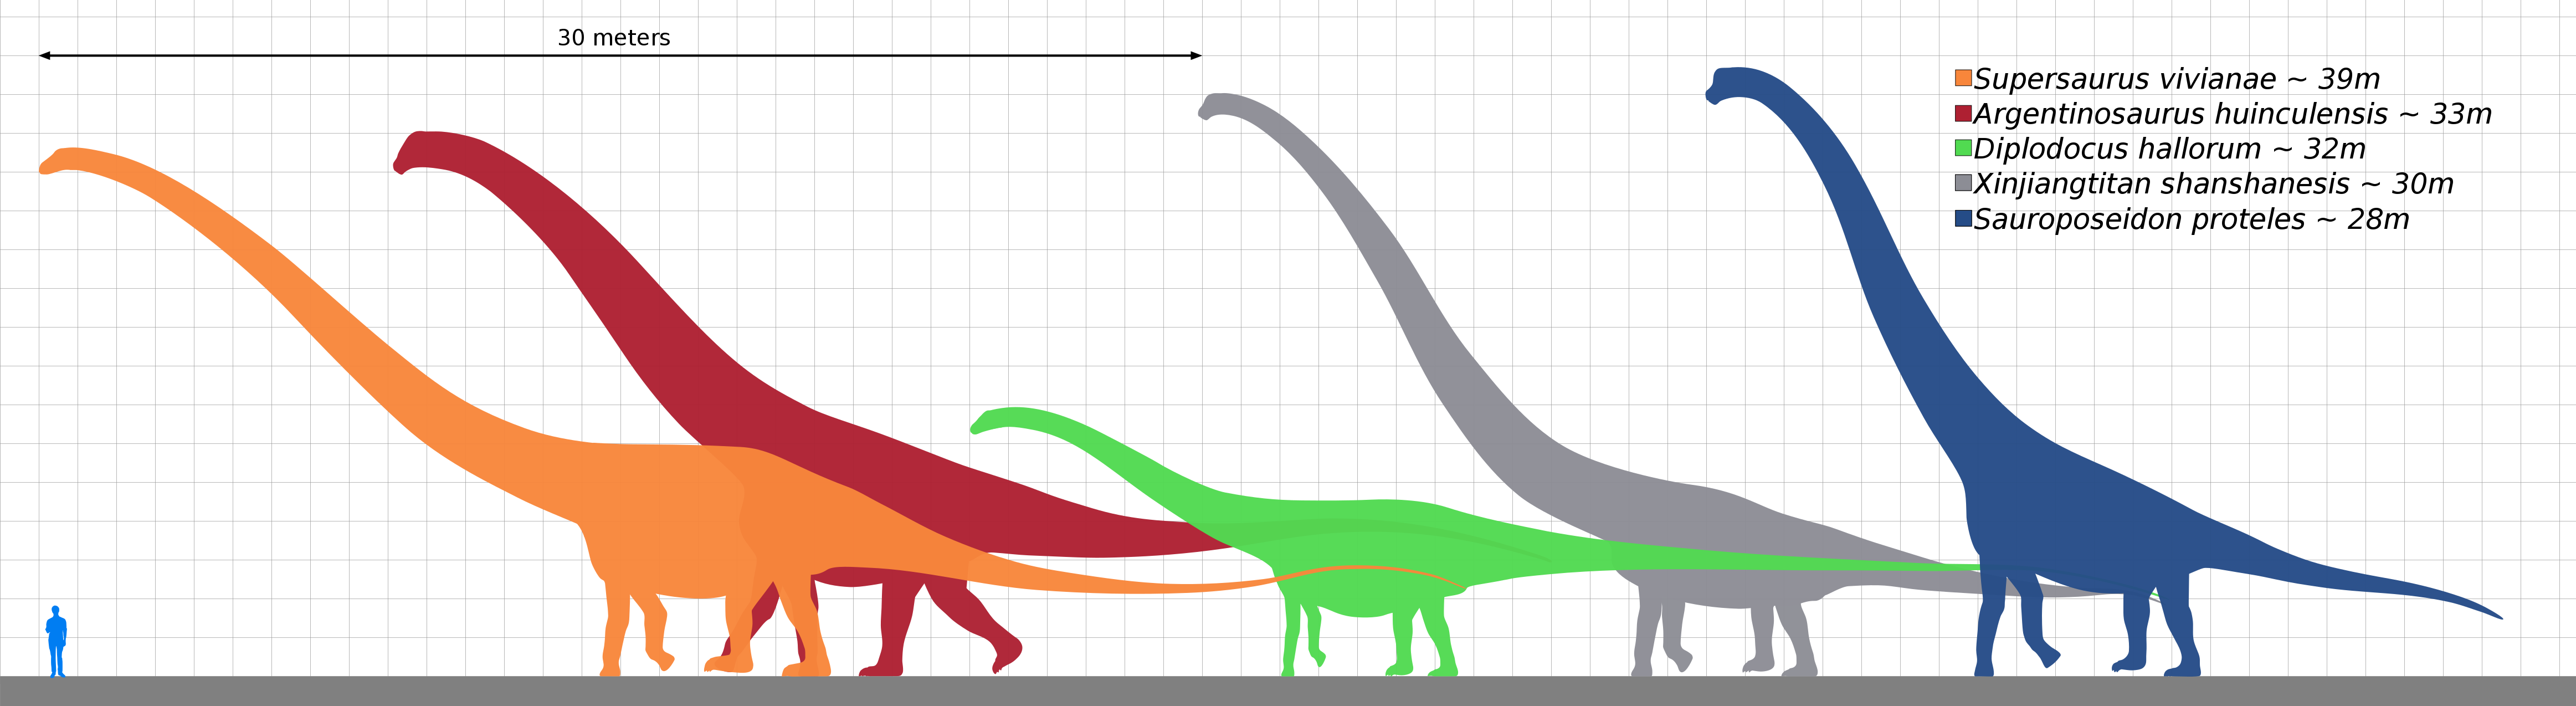 Diagram,  Size comparison of selected giant sauropod dinosaurs